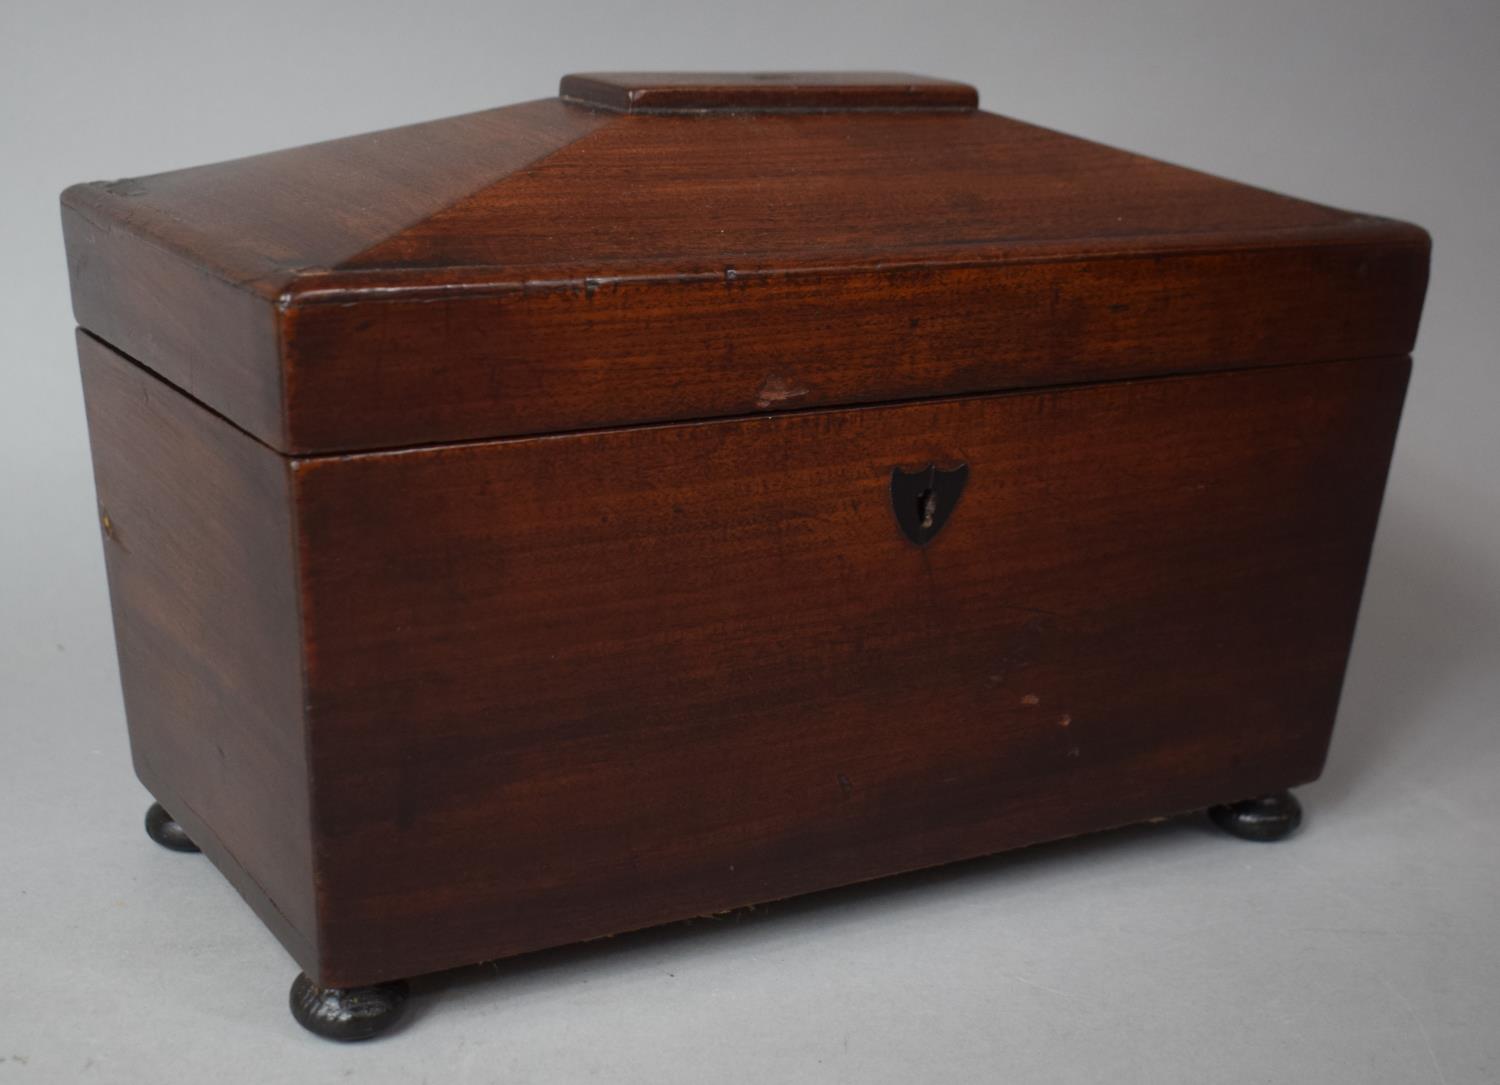 A Mid 19th Century Mahogany Sarcophagus Shaped Two Division Tea Caddy with Replacement Cut Glass